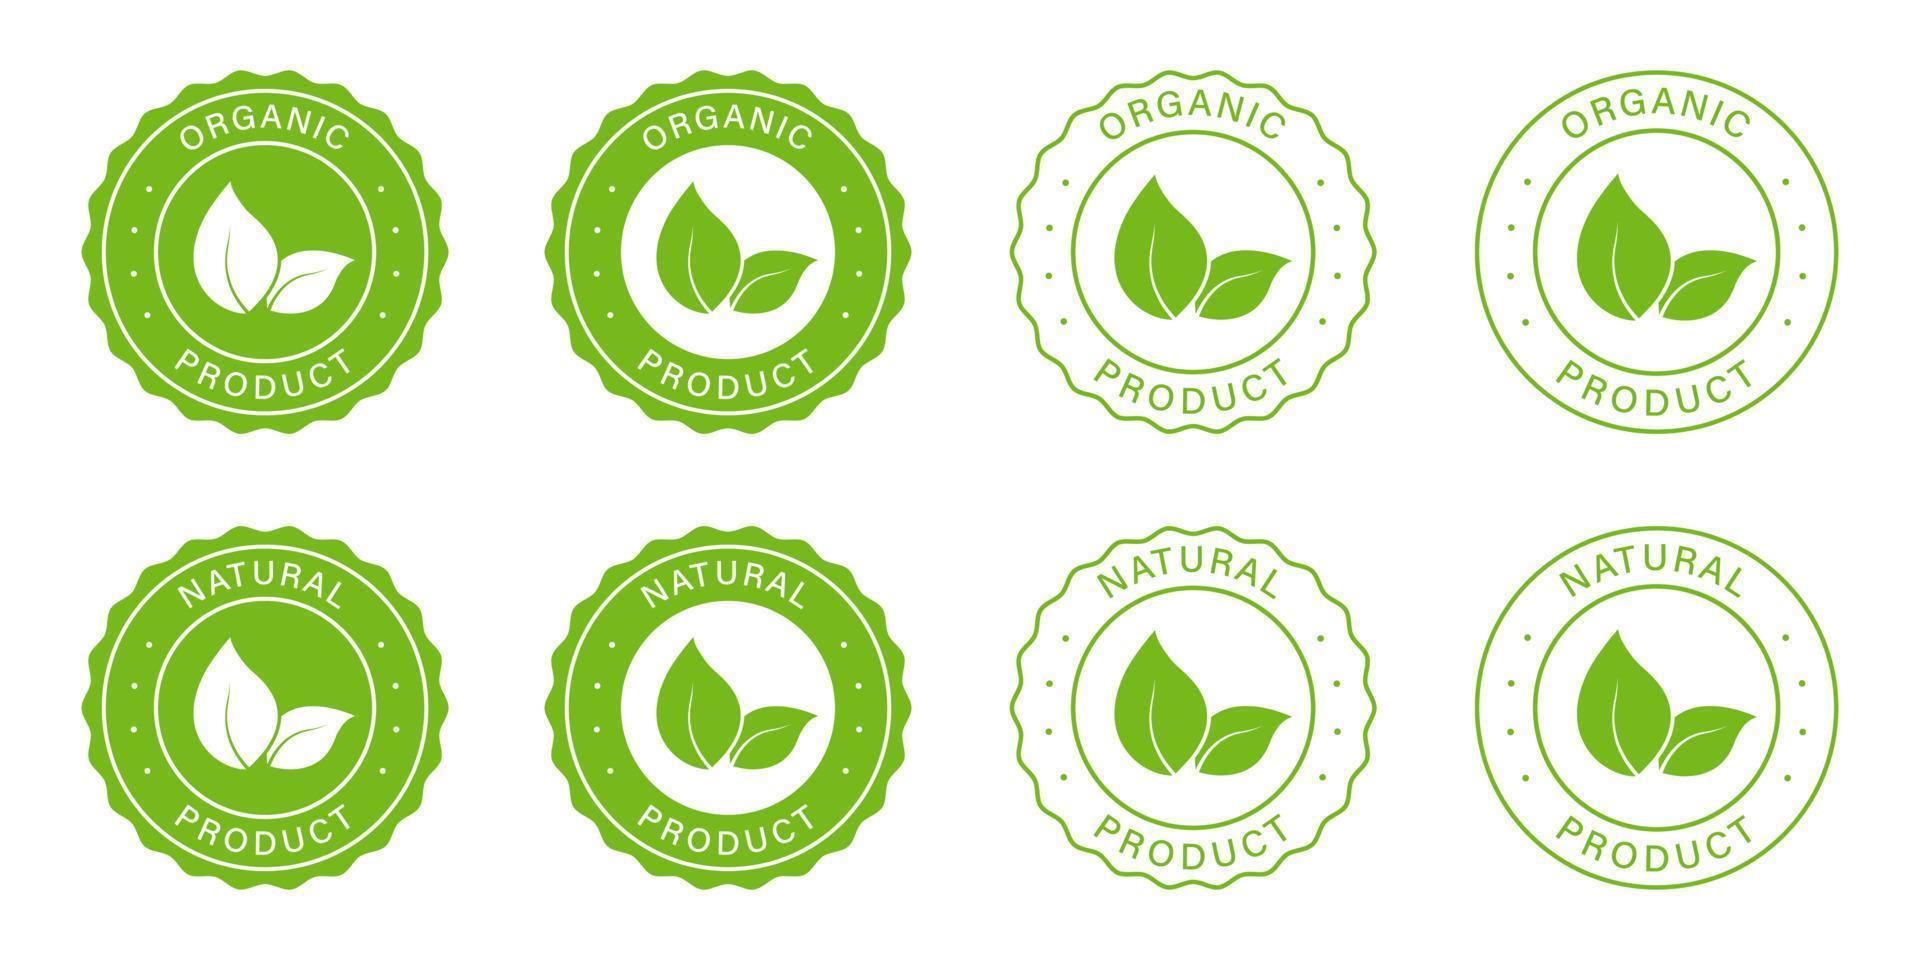 Organic Natural Product Icon Set. Healthy Eco Green Label. Bio Food Logo. 100 Percent Ecology Product Vegan Food Stamp. Natural Product Symbol. Ecology Sign. Isolated Vector Illustration.